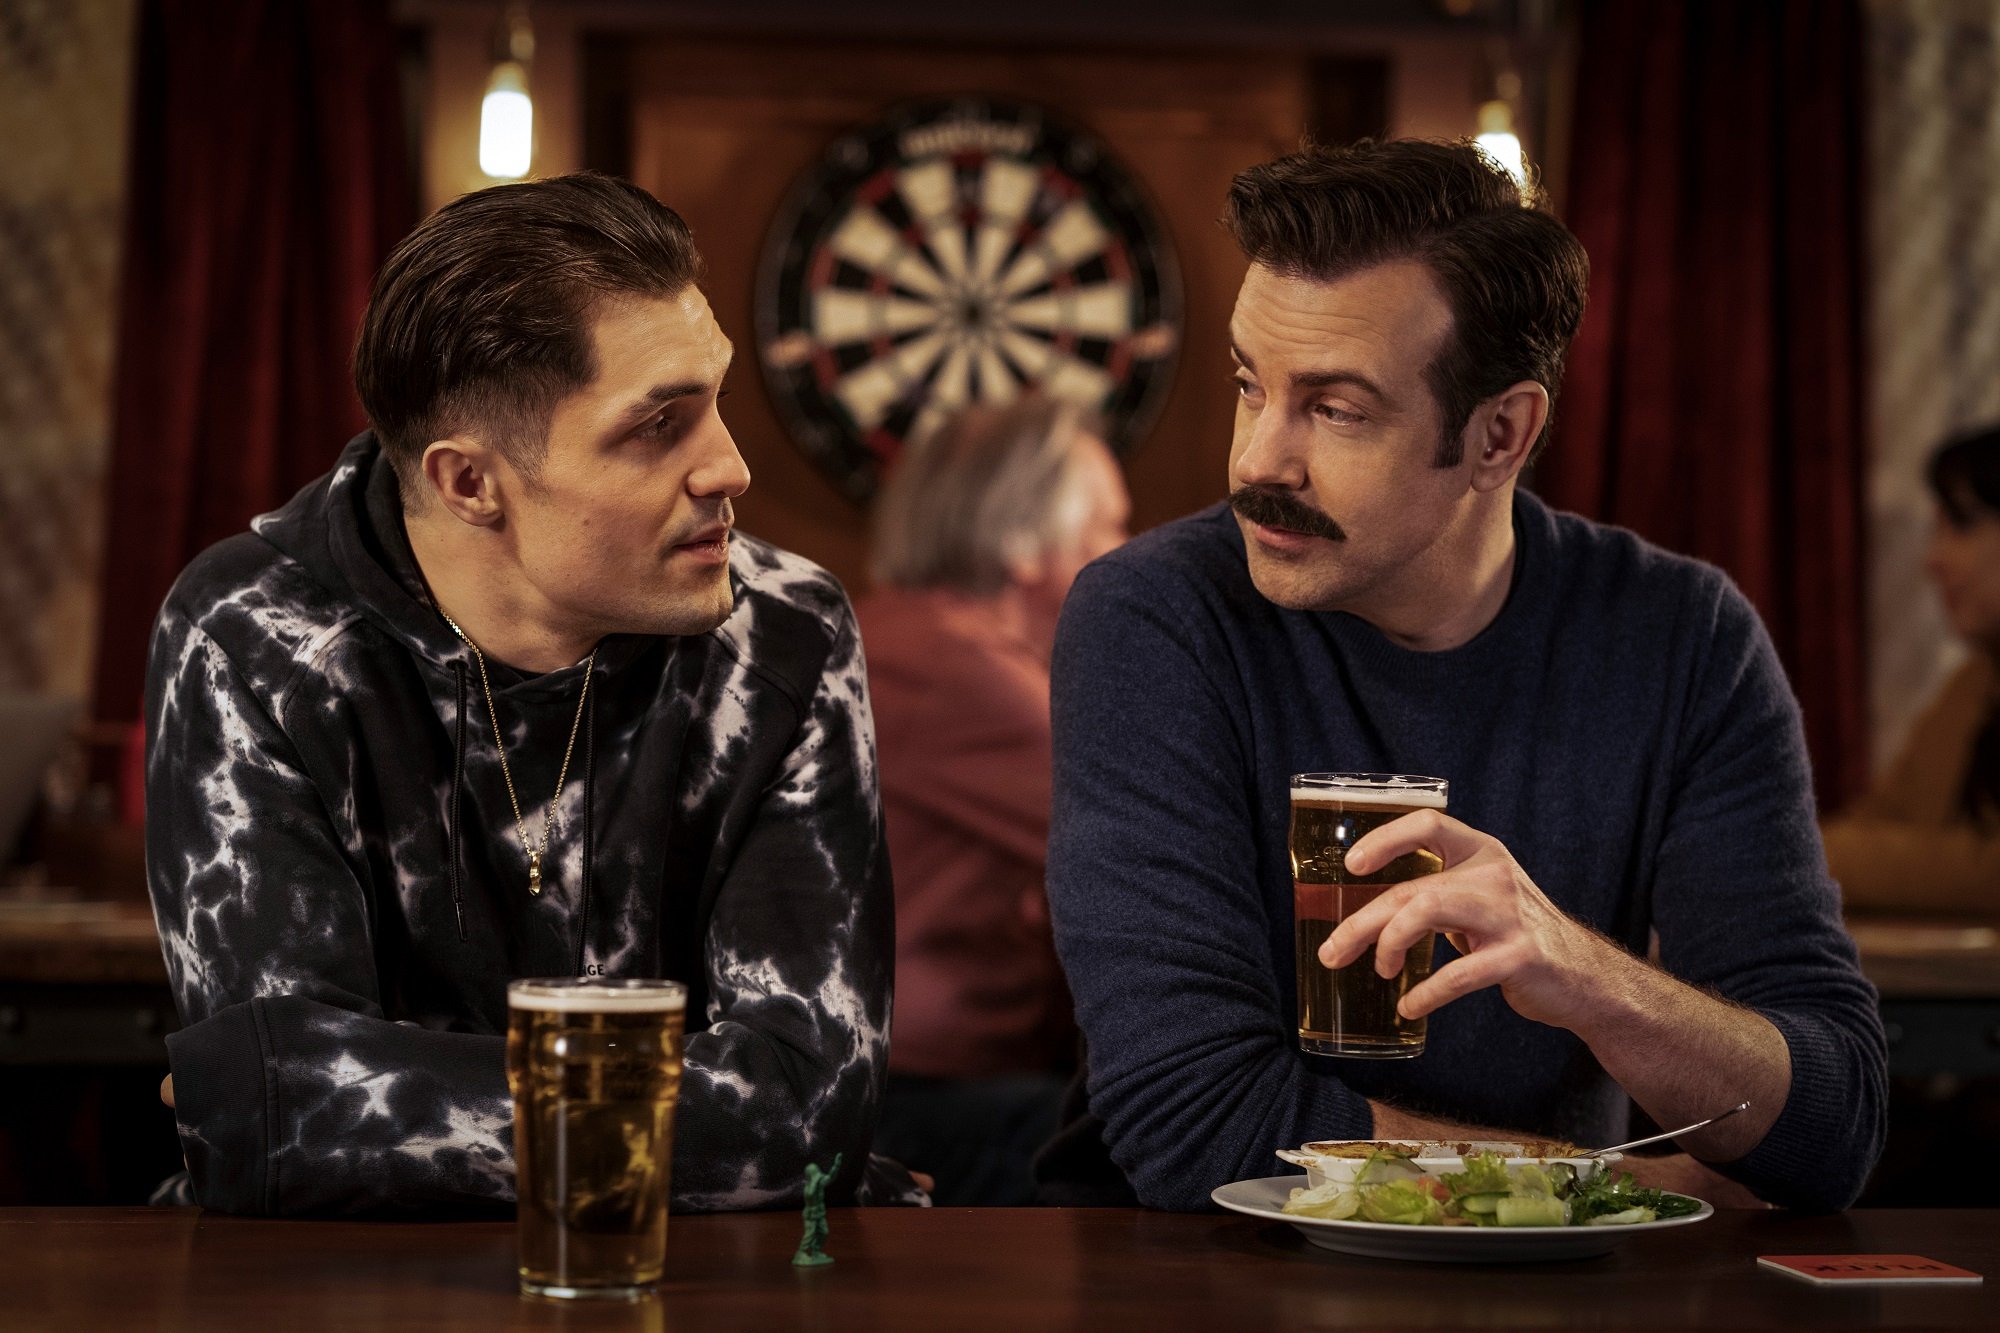 Jamie Tartt and Ted Lasso meet at a restaurant and drink beer in 'Ted Lasso' Season 2